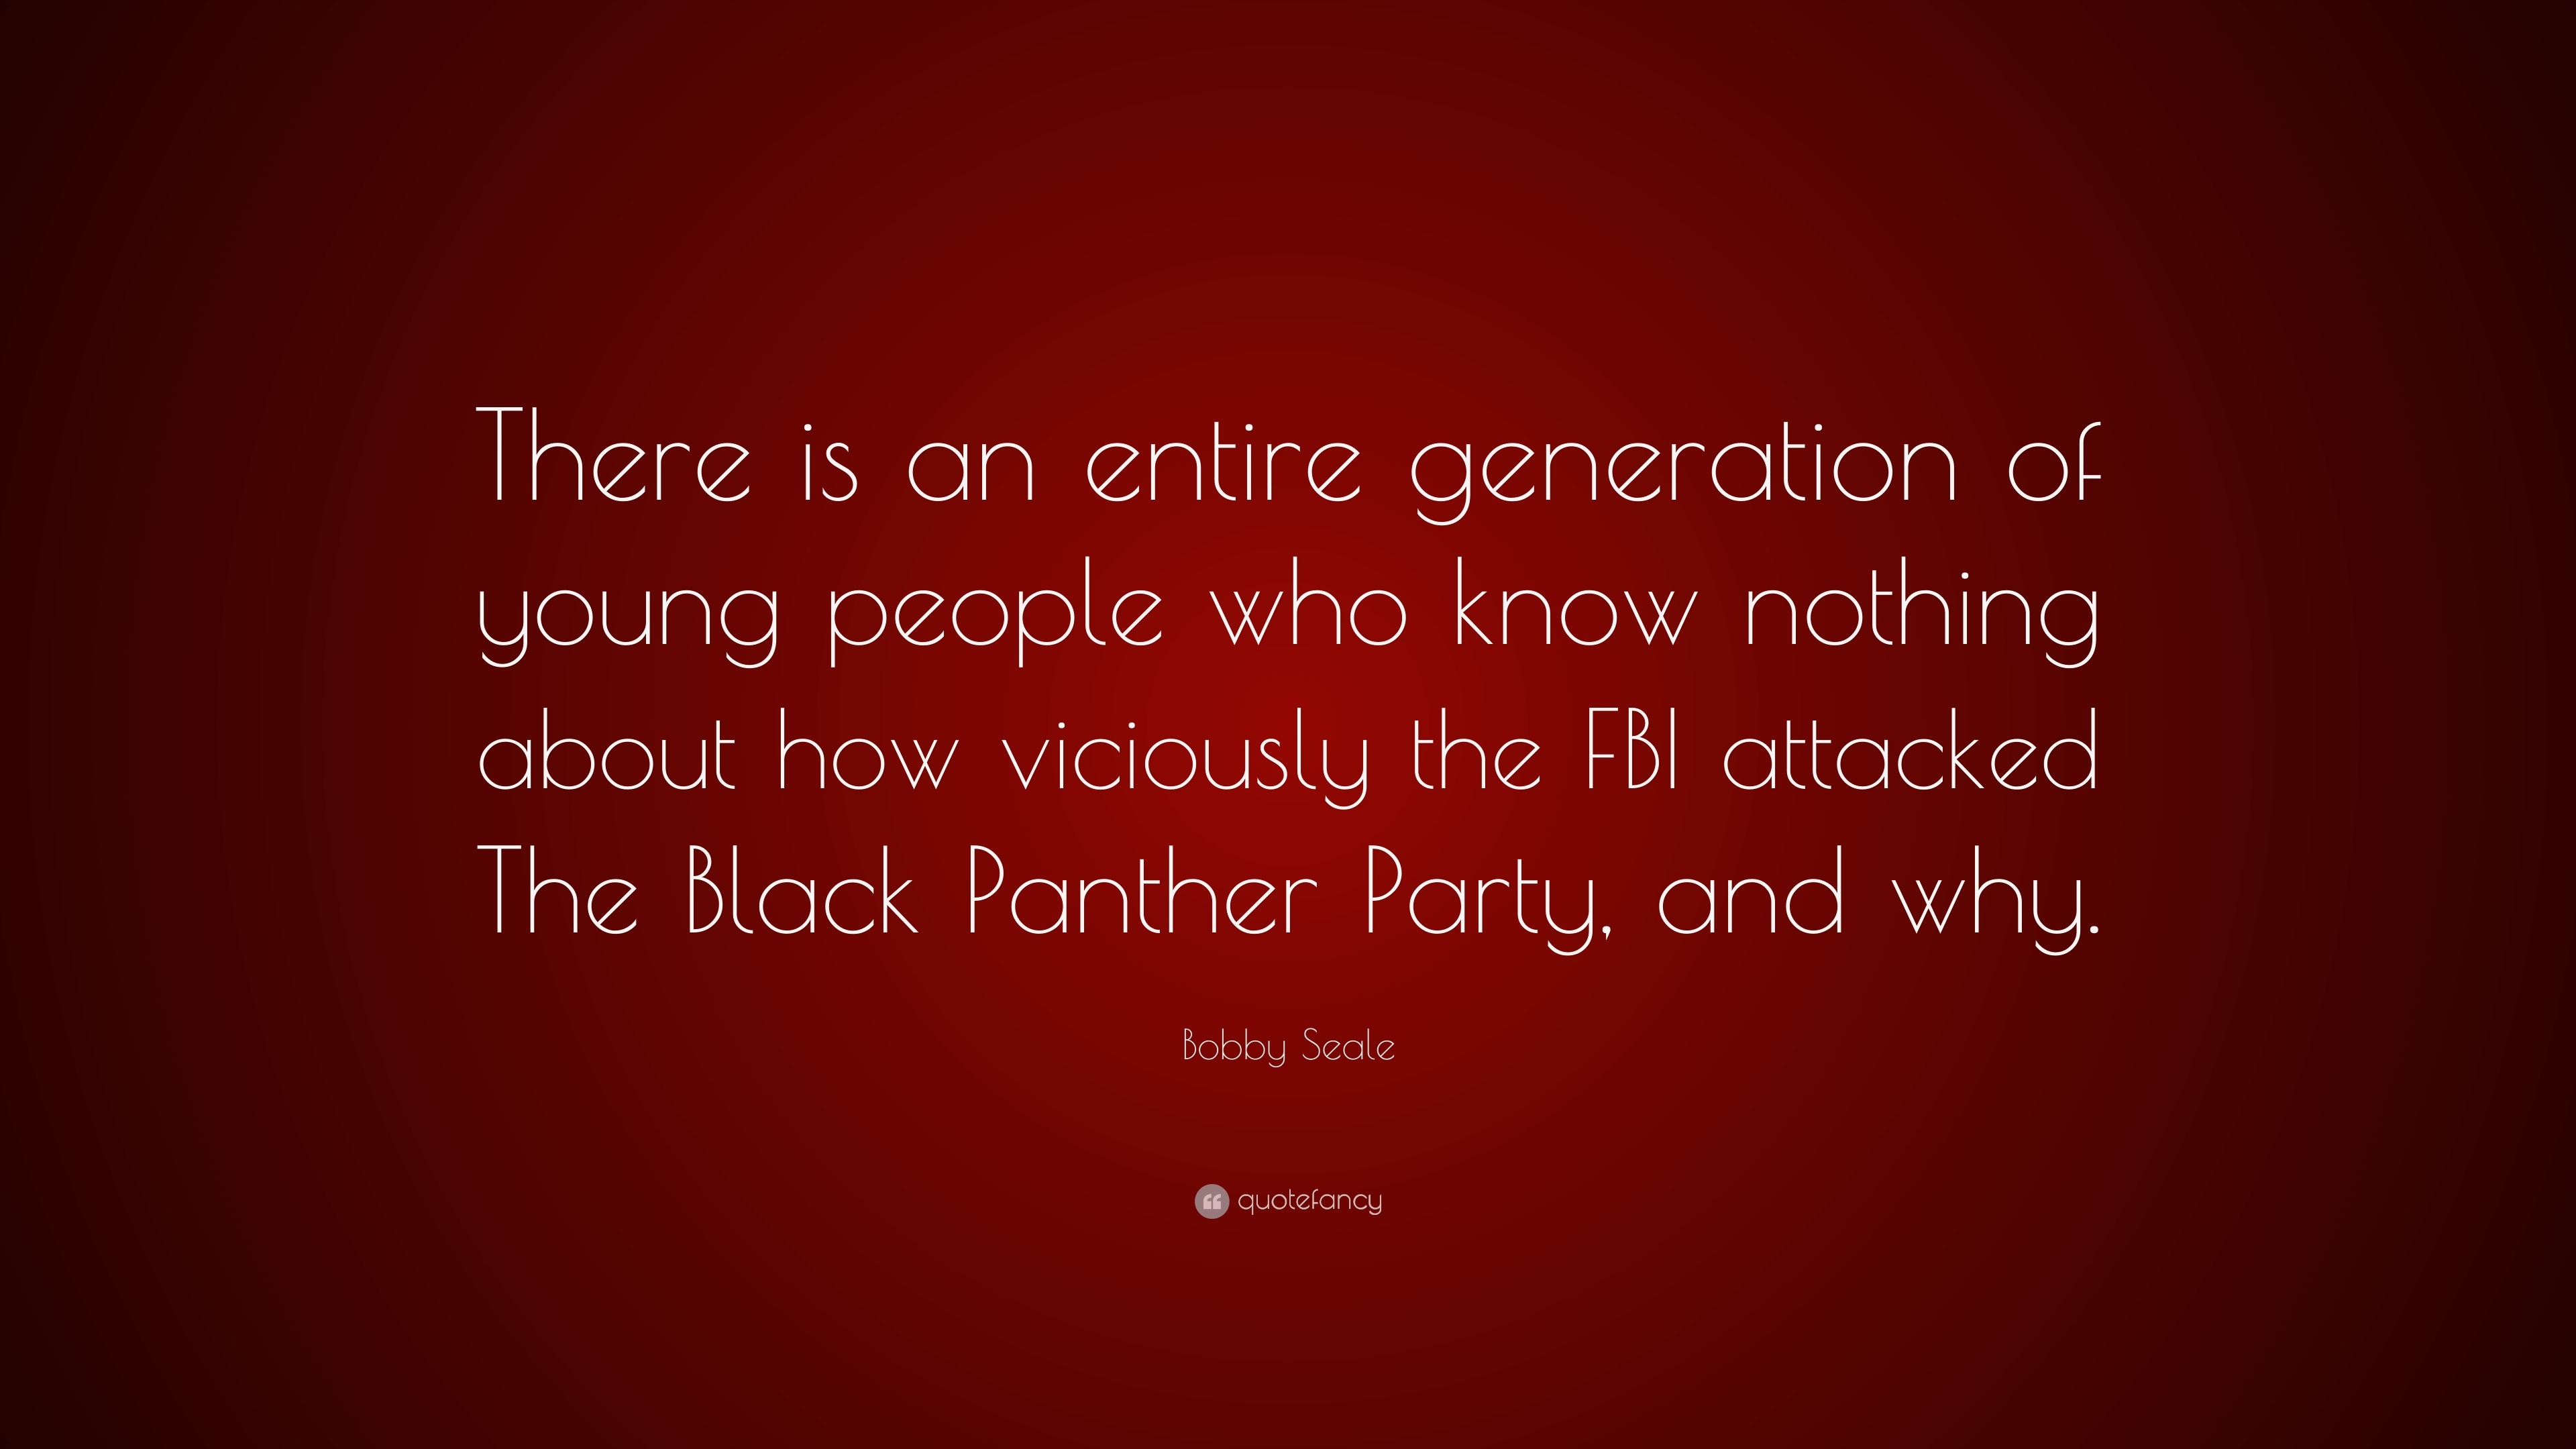 Top 25 Bobby Seale Quotes 2021 Update Quotefancy